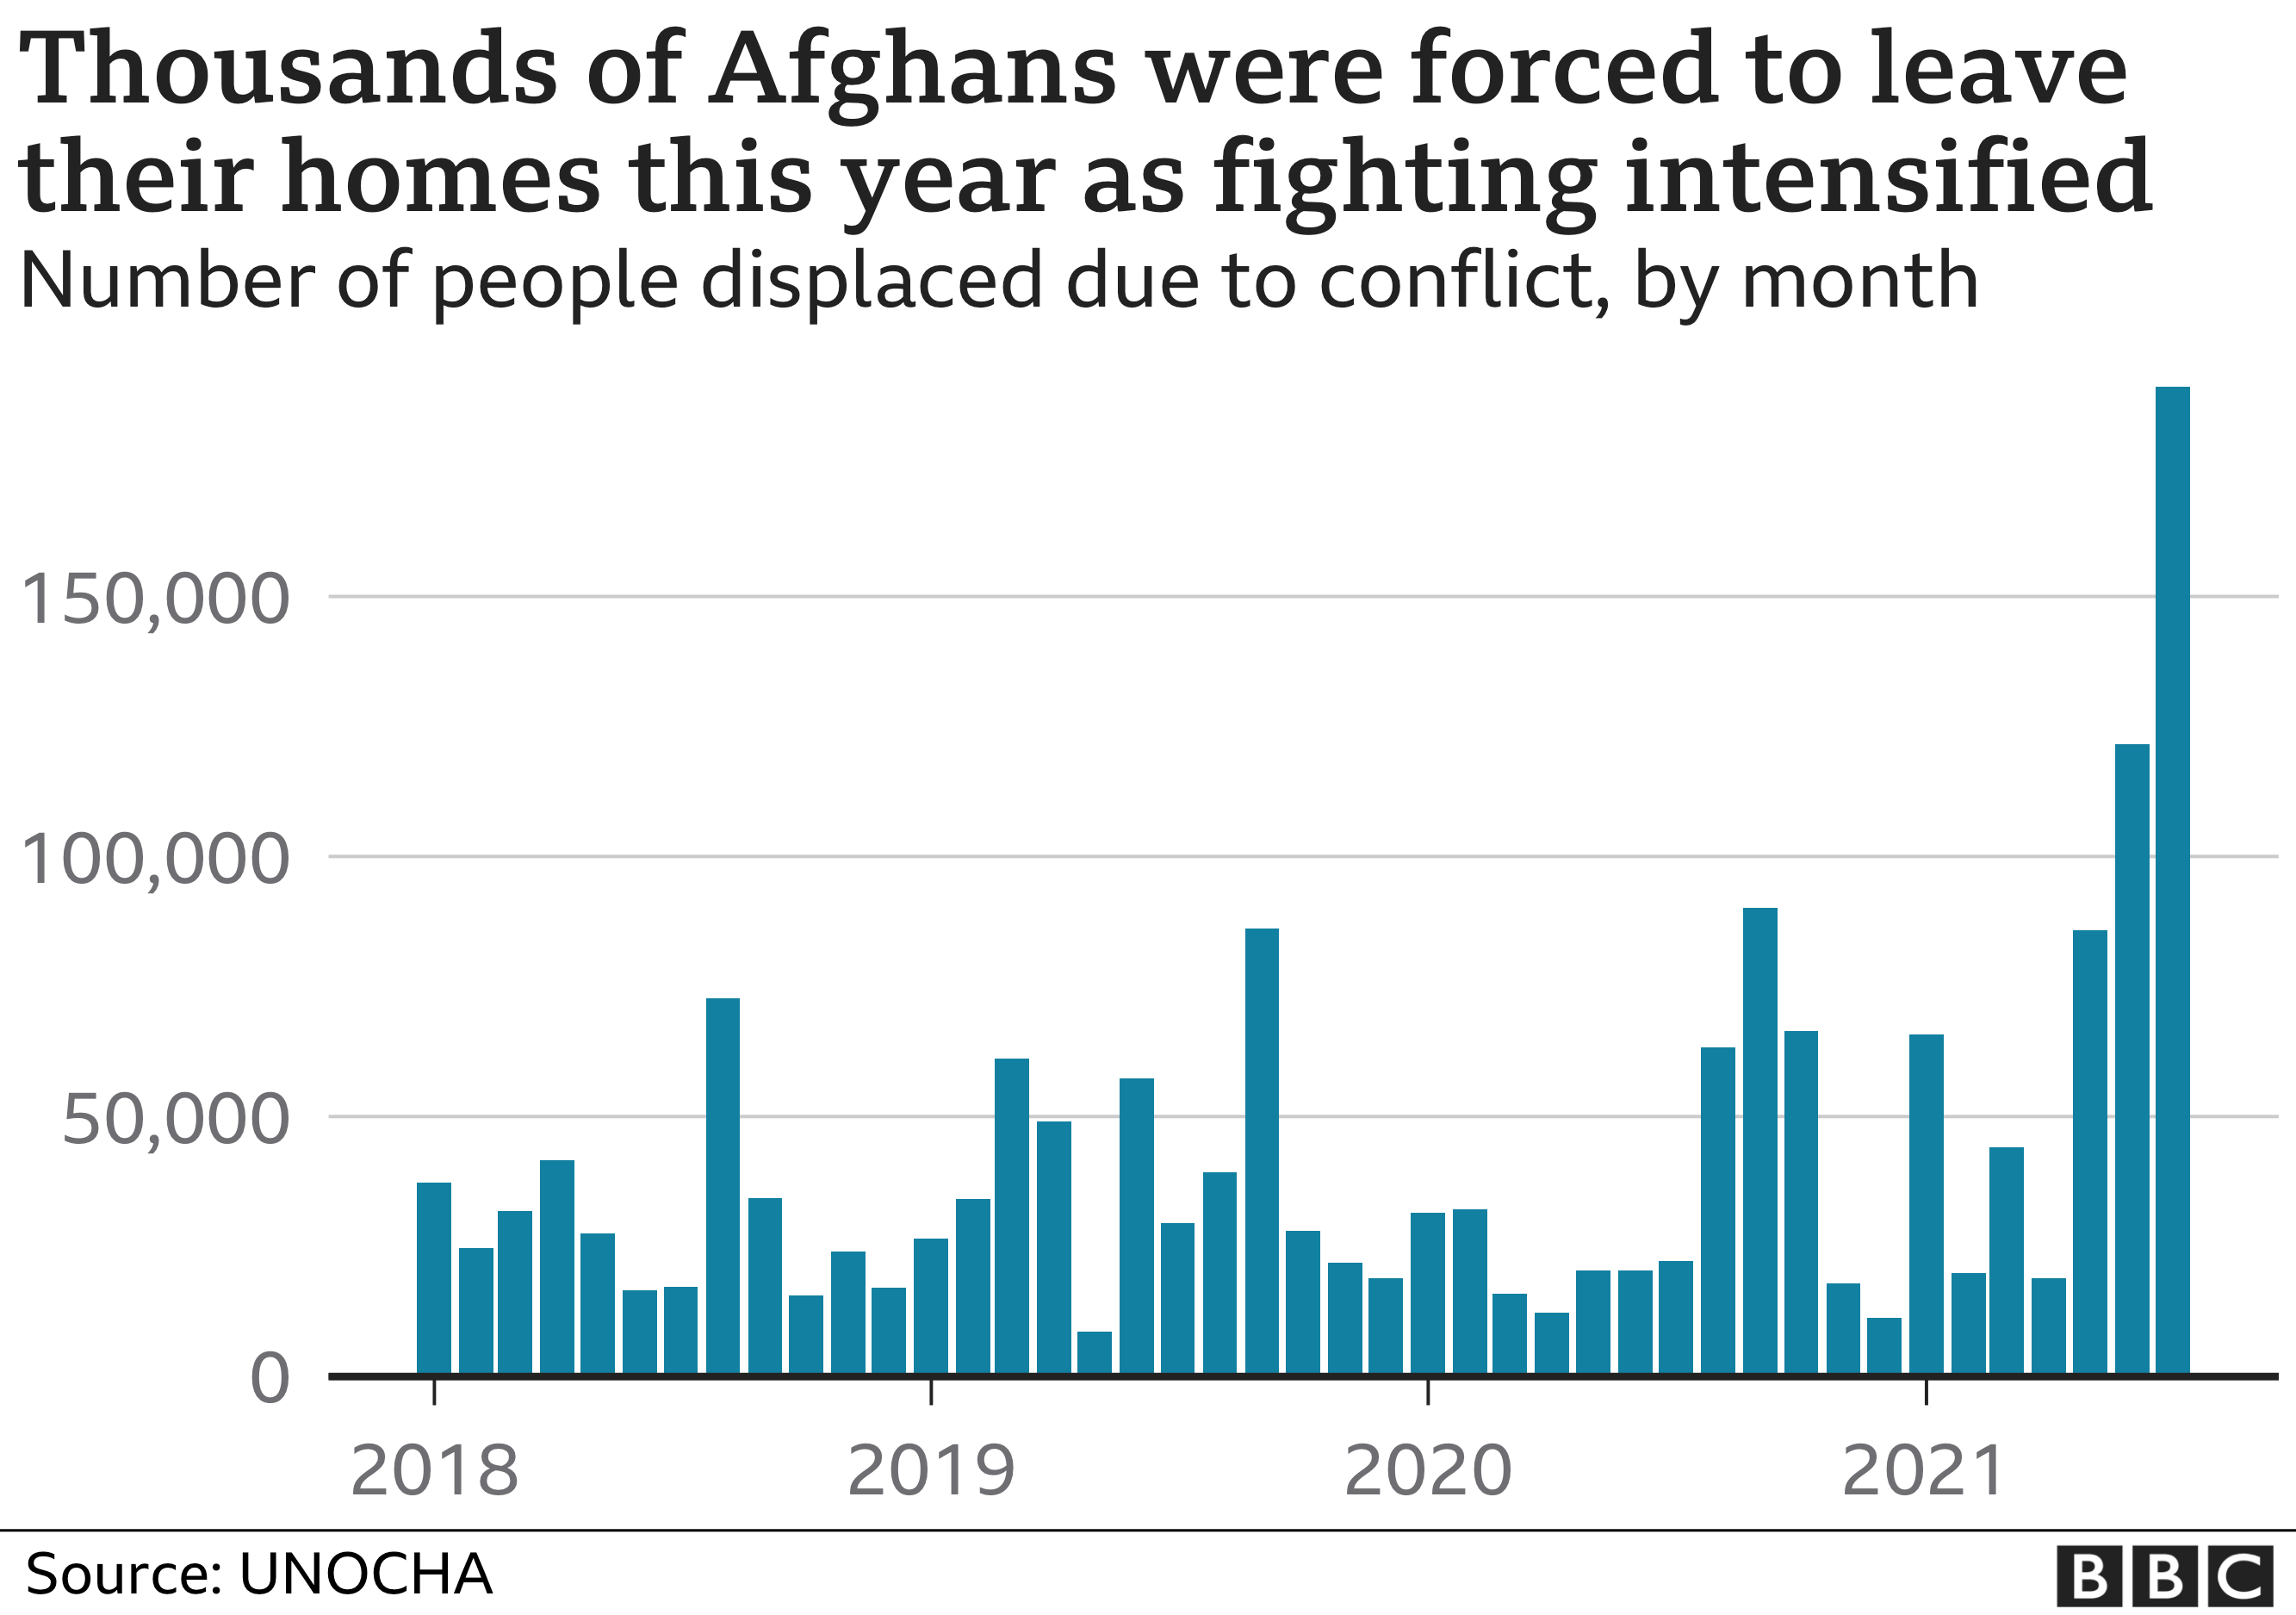 Chart showing the number of Afghans internally displaced due to conflict since 2018